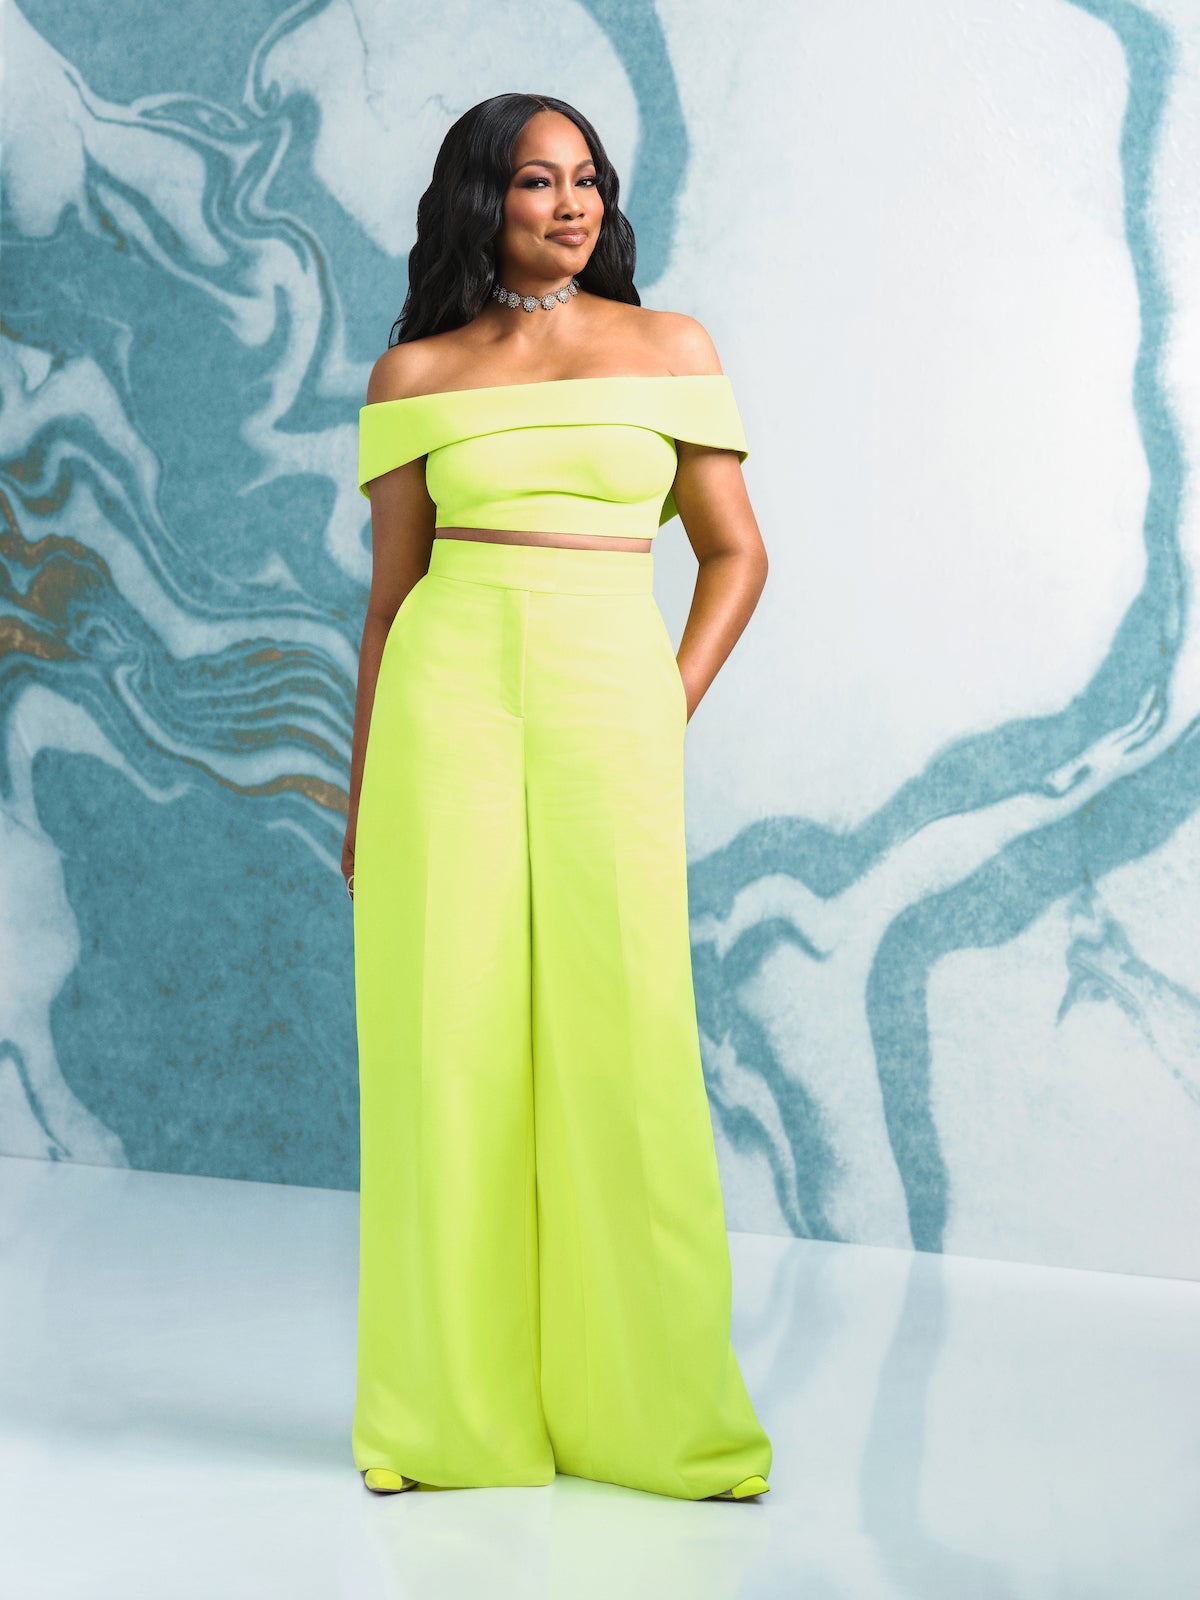 Every Photo Of Garcelle Beauvais (So Far!) From 'Real Housewives of Beverly Hills'